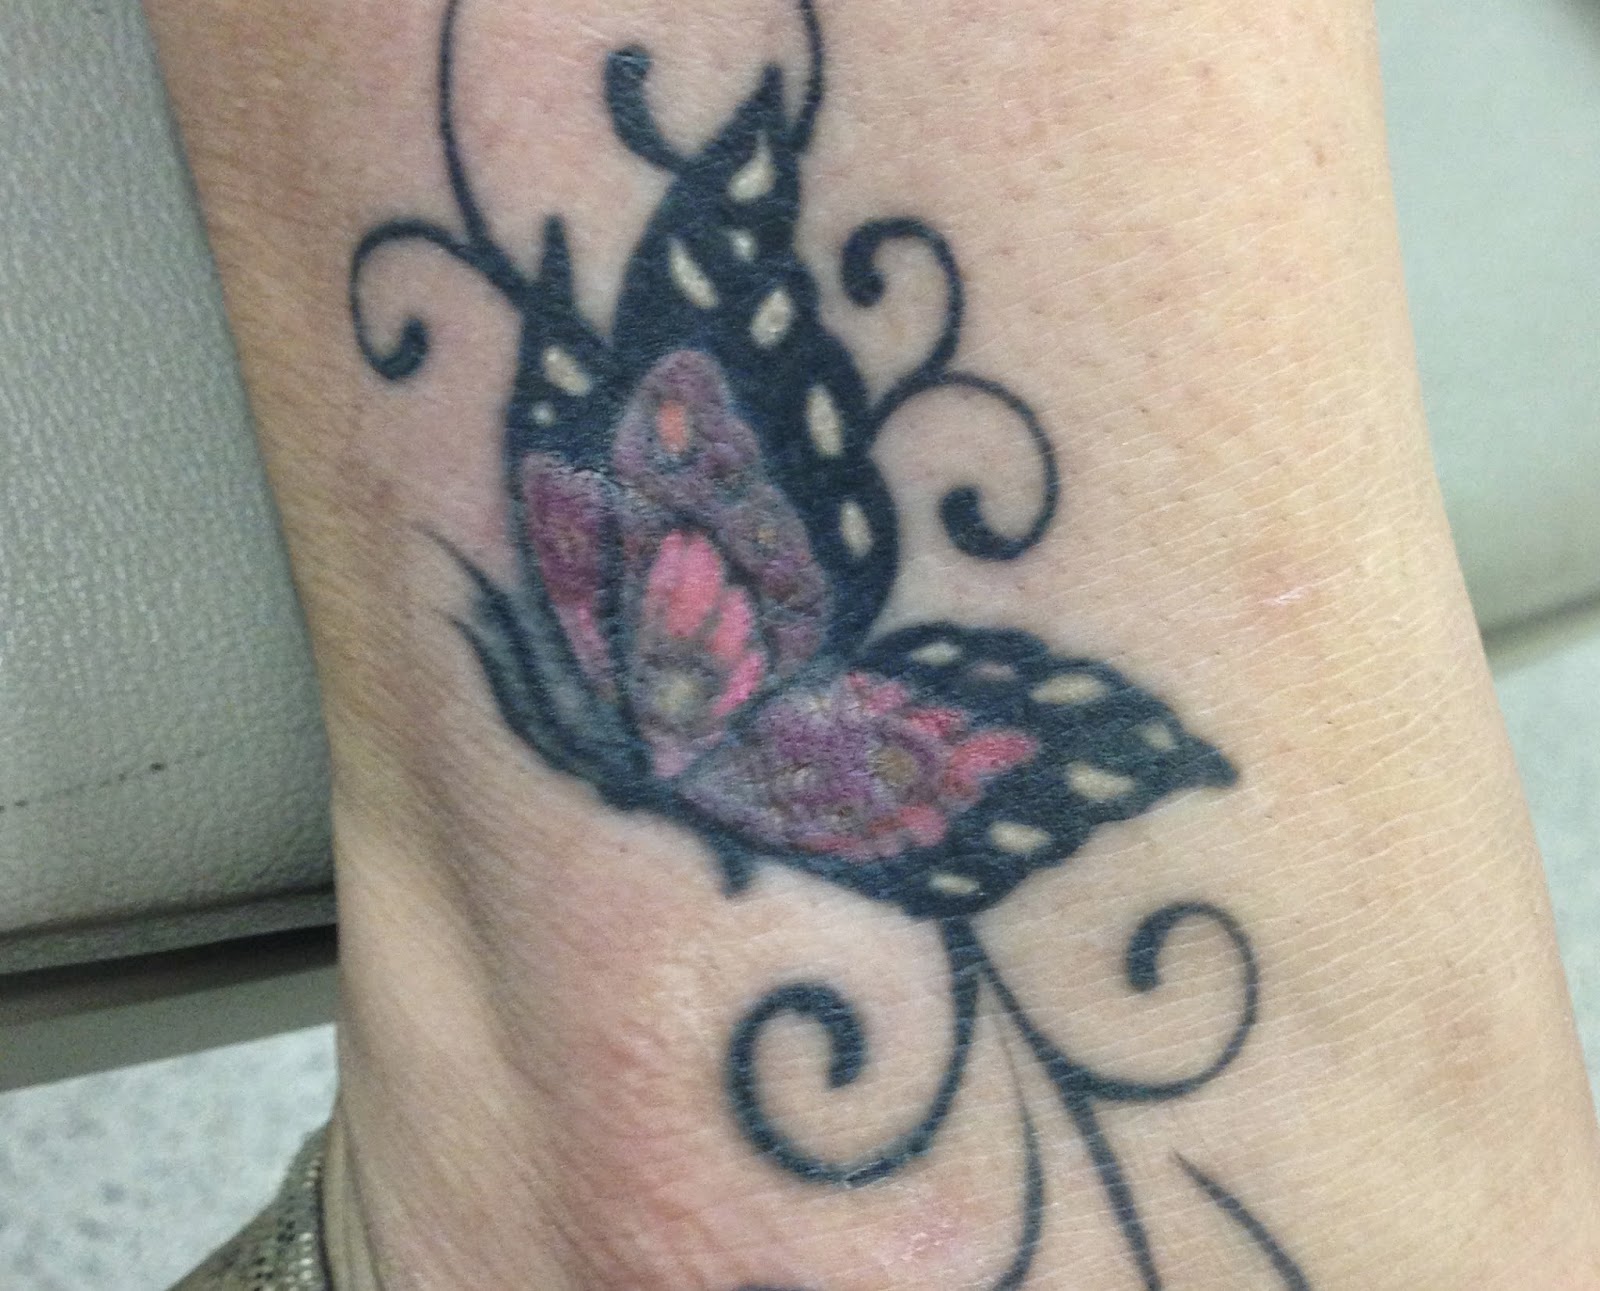 Tattoo Reactions: Allergic Contact Dermatitis By David Robles, MD, PhD